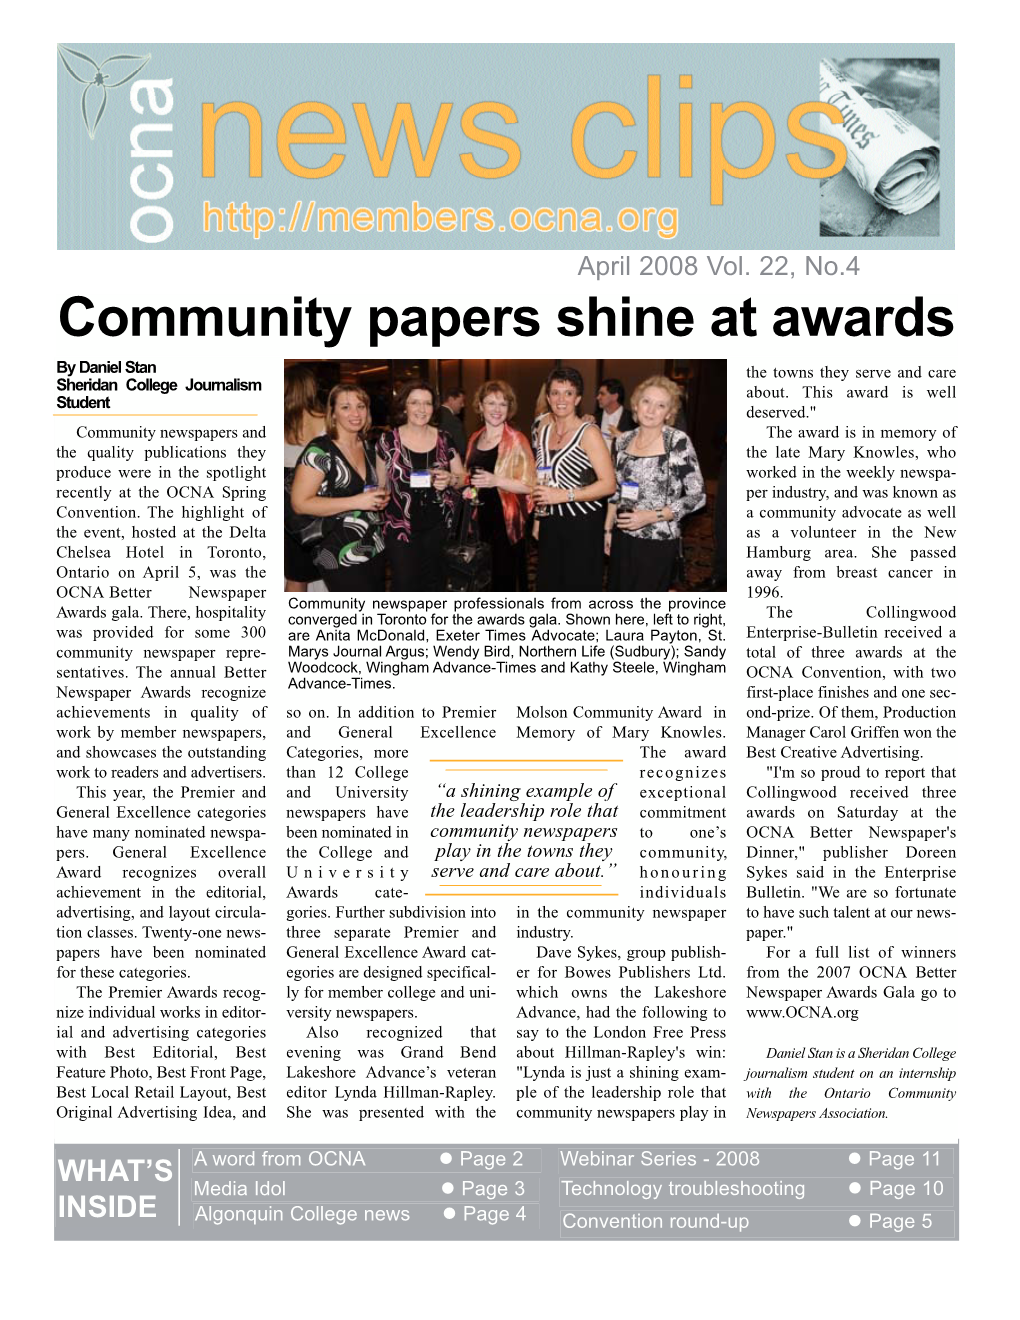 Community Papers Shine at Awards